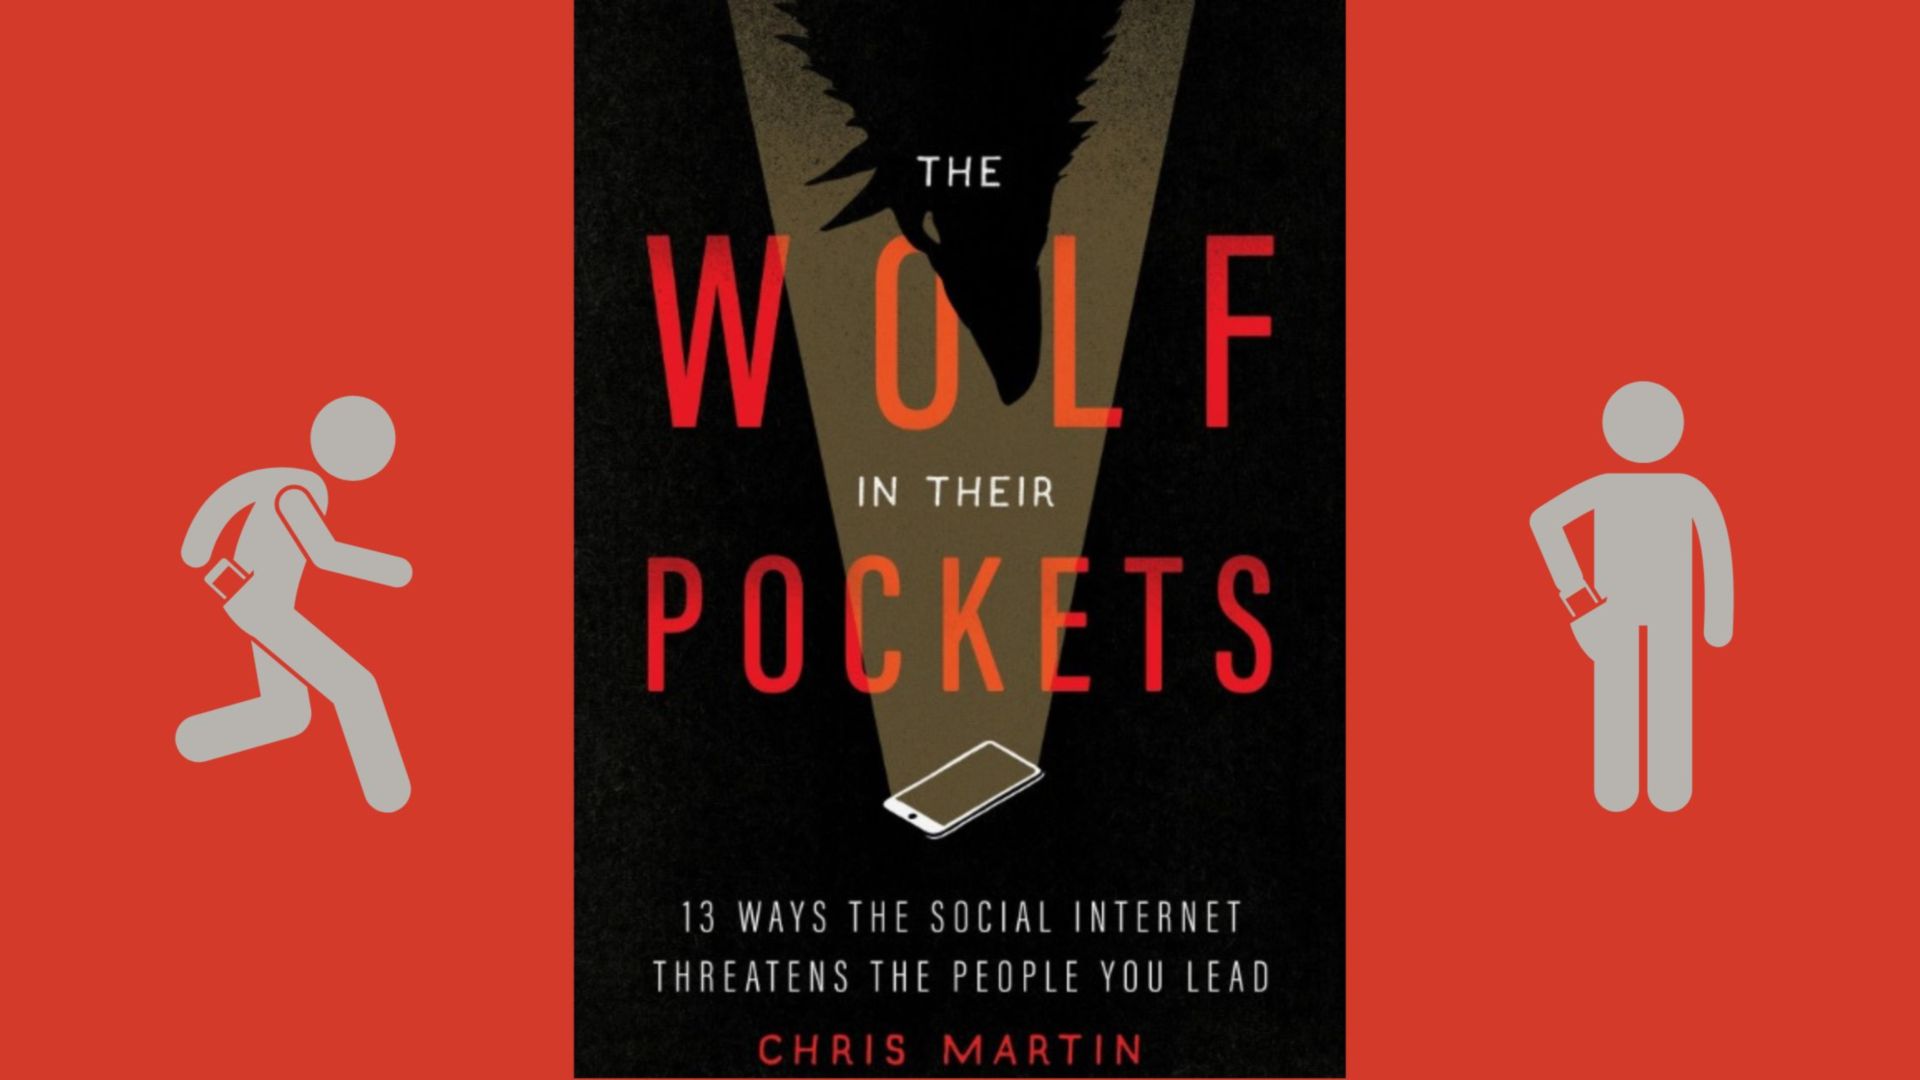 A review of 'The Wolf in their Pockets' by Internet expert Chris Martin